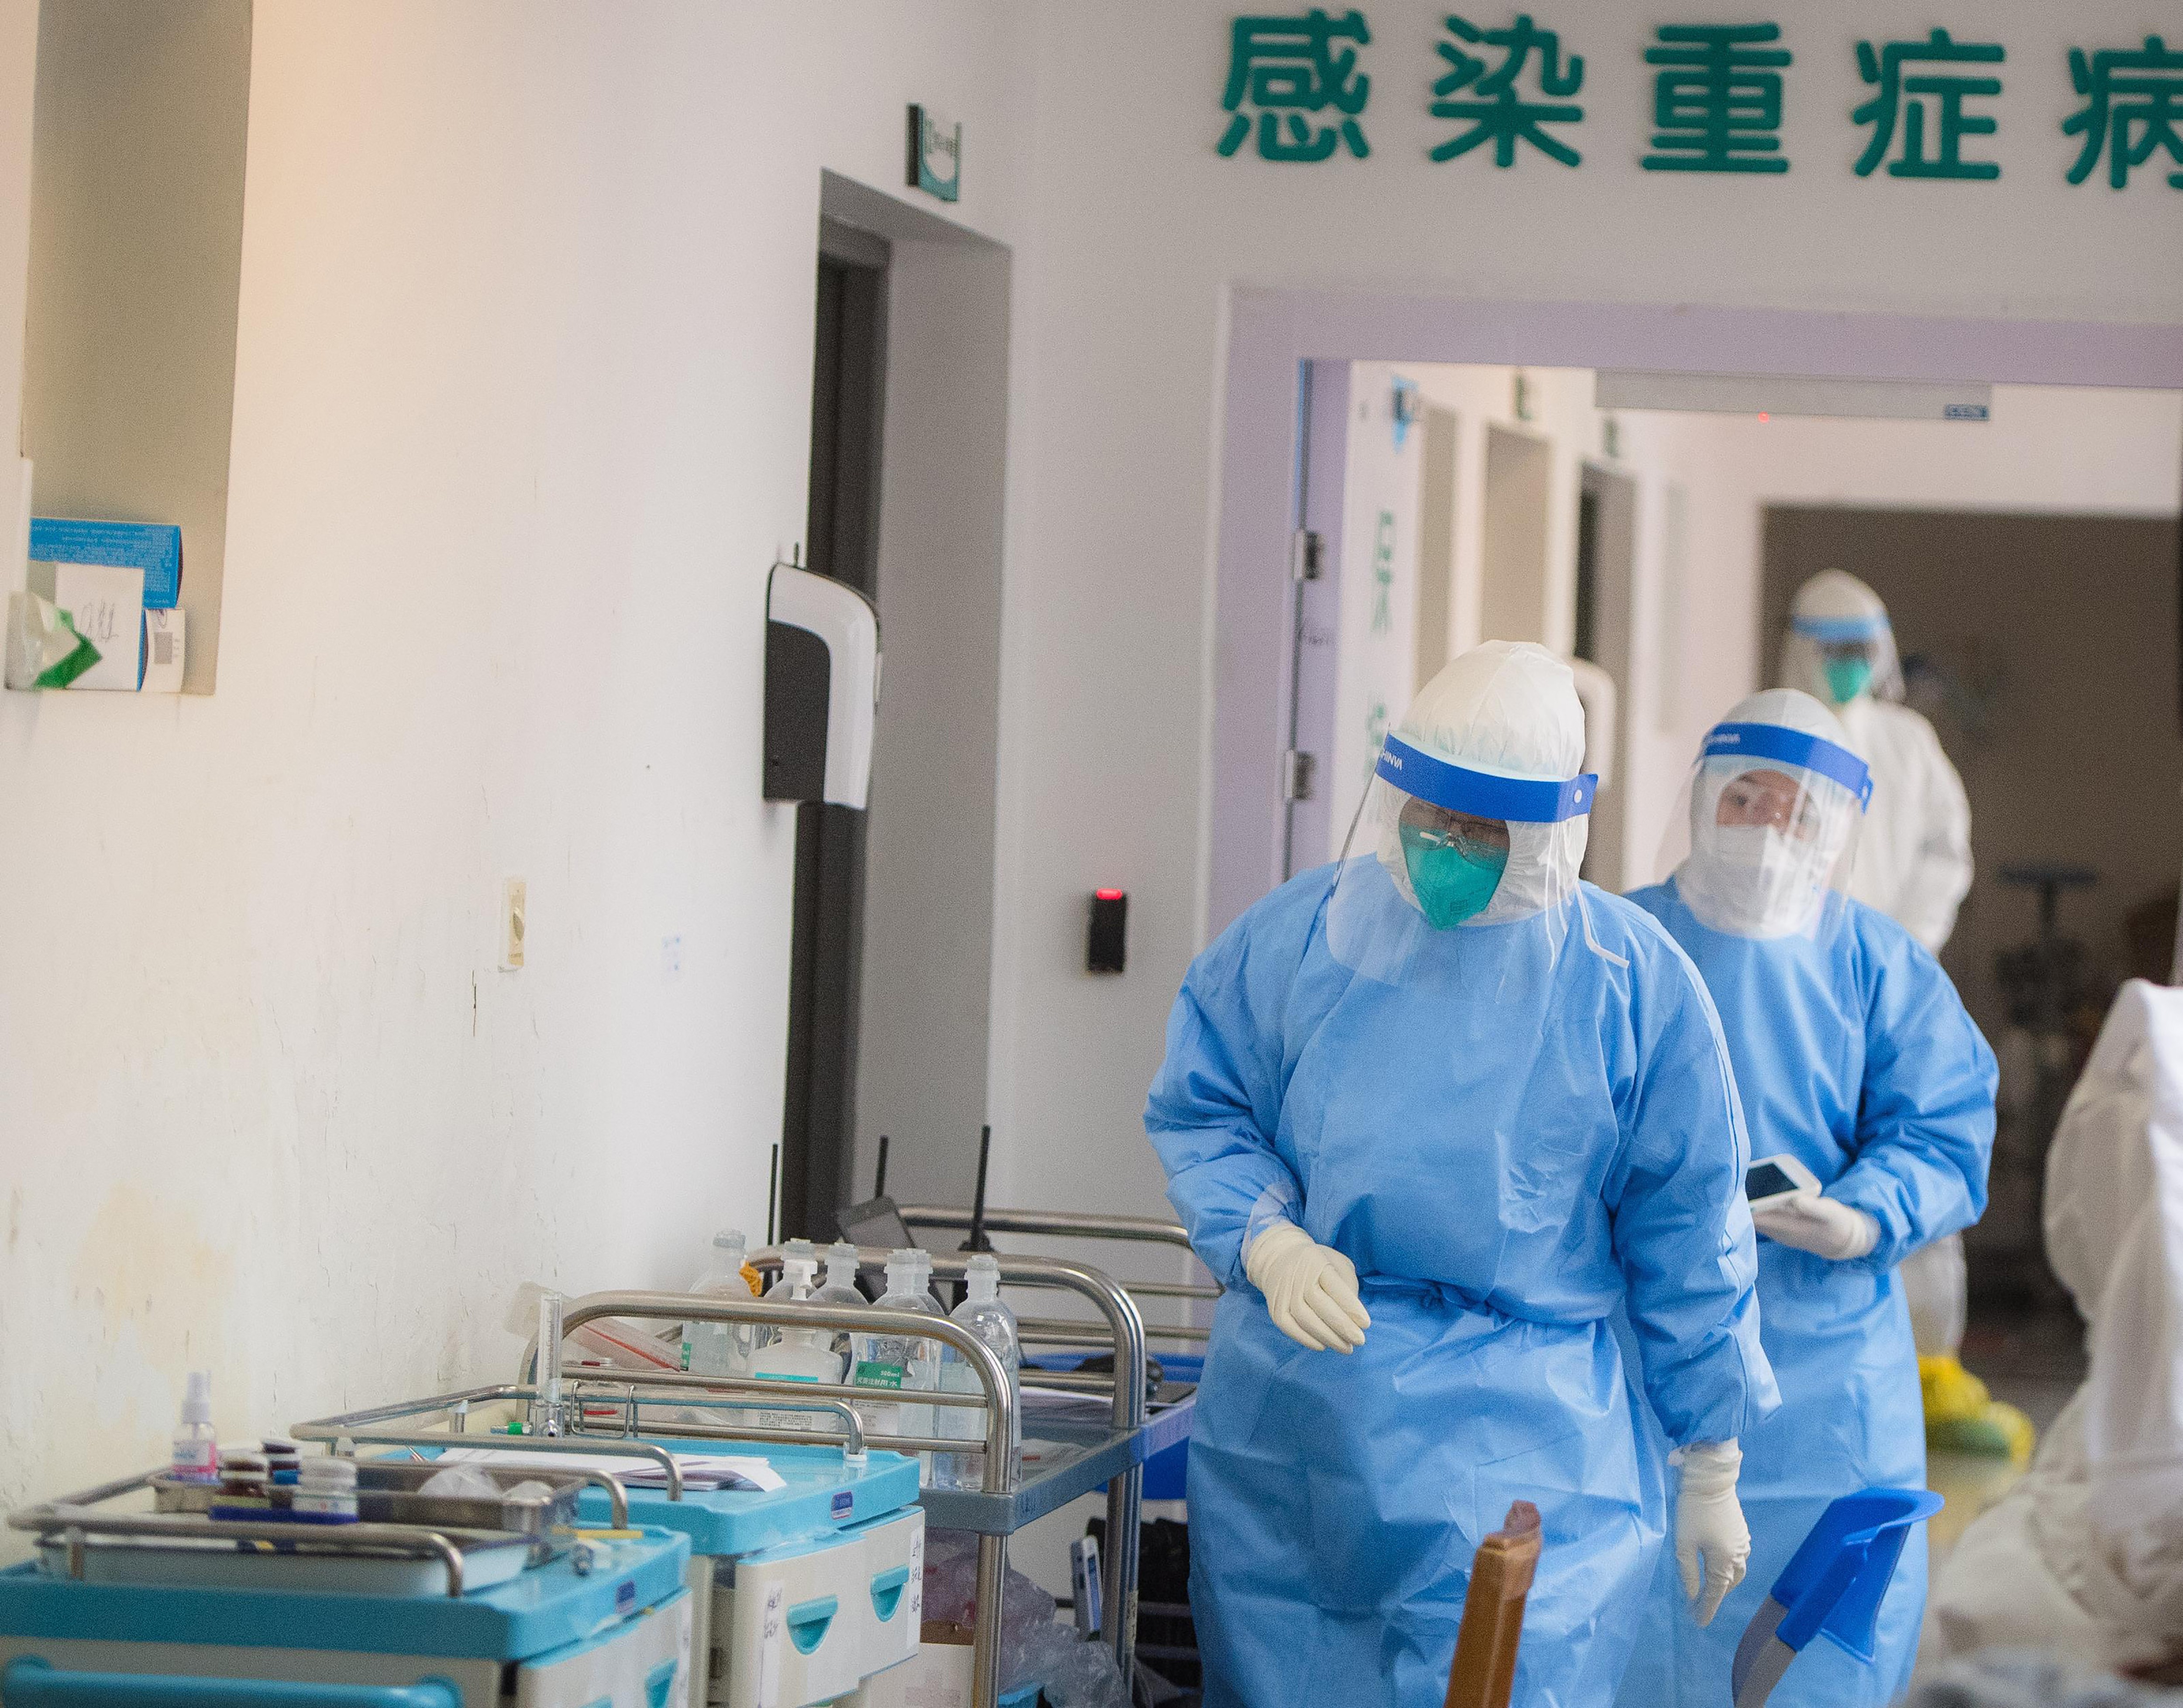 China thanked Japan for its support, including donations of masks, goggles and protective gear to fight the coronavirus outbreak. Photo: AP